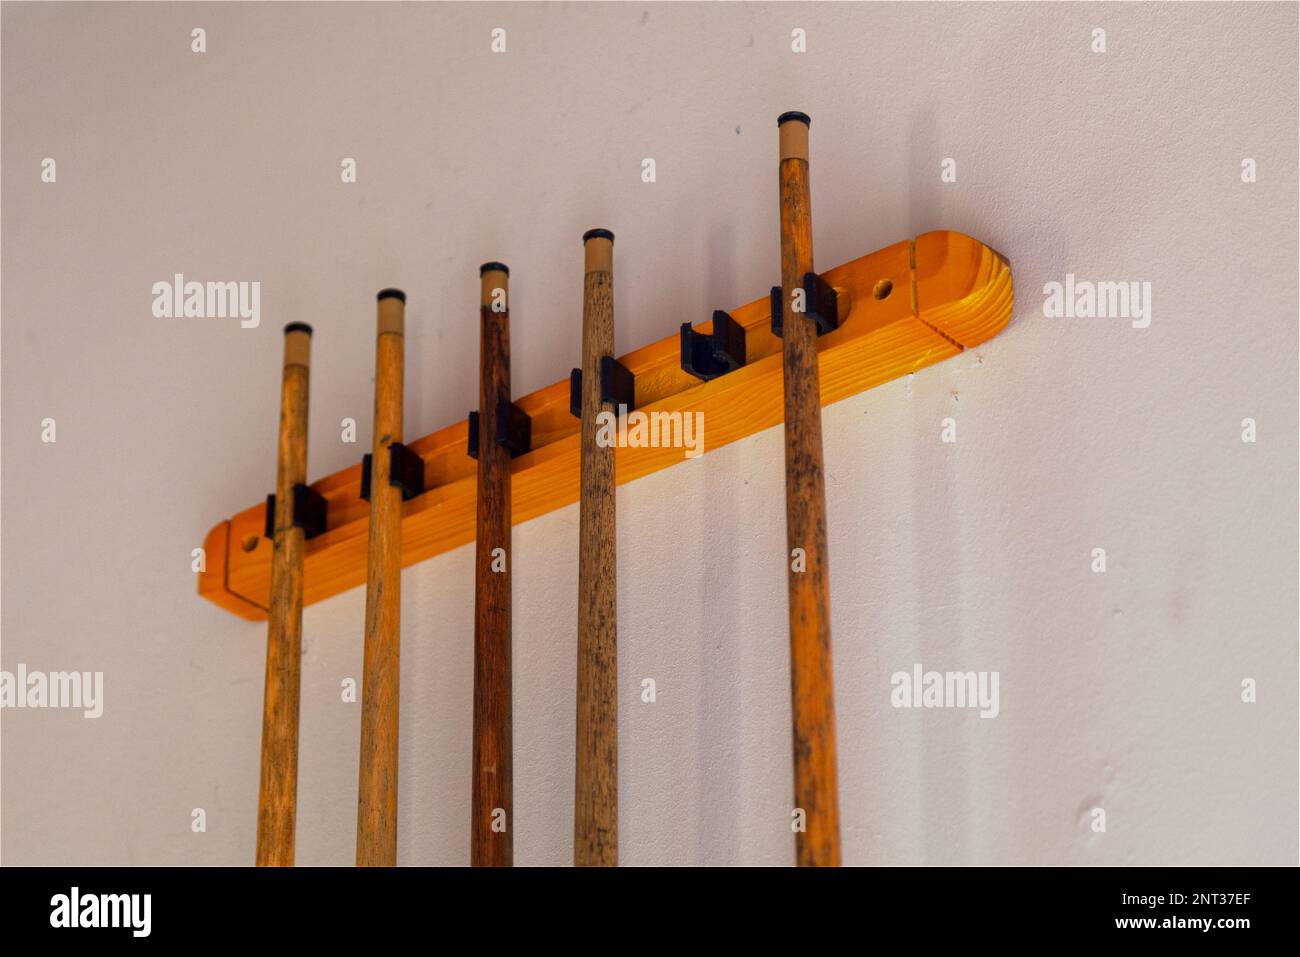 Close-up on a rack of pool cues. Stock Photo